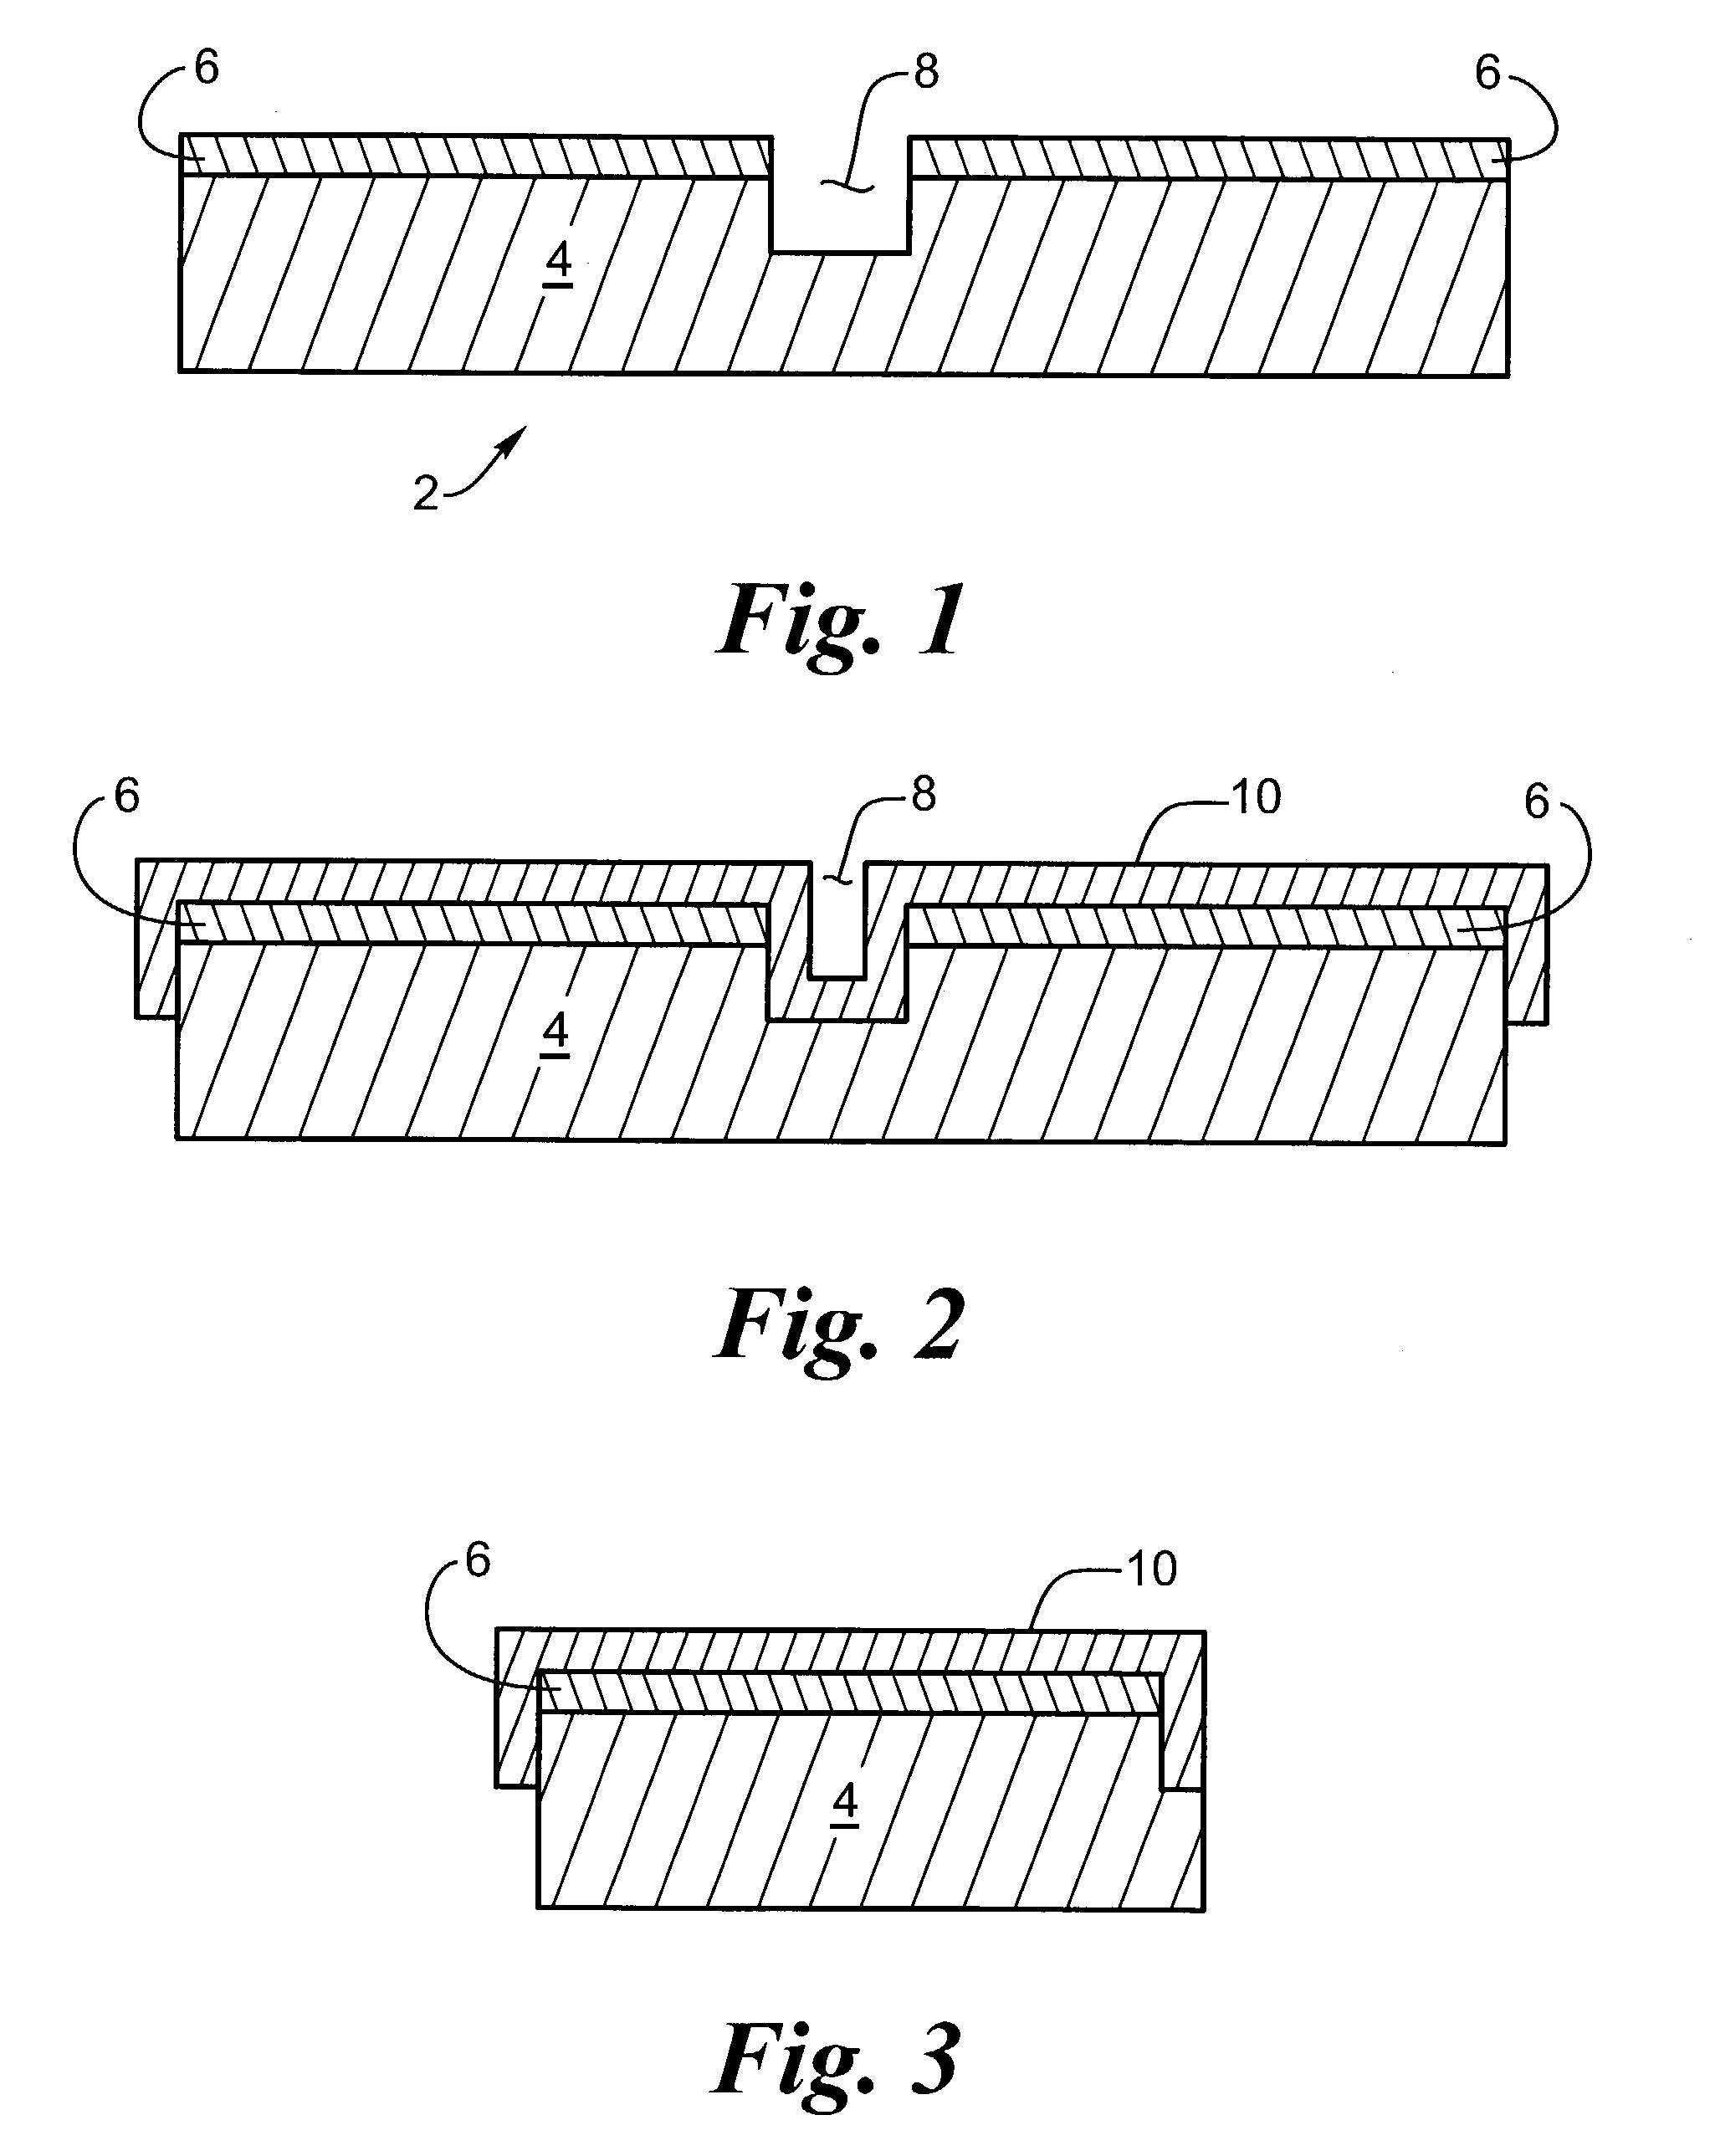 Chip level hermetic and biocompatible electronics package using SOI wafers